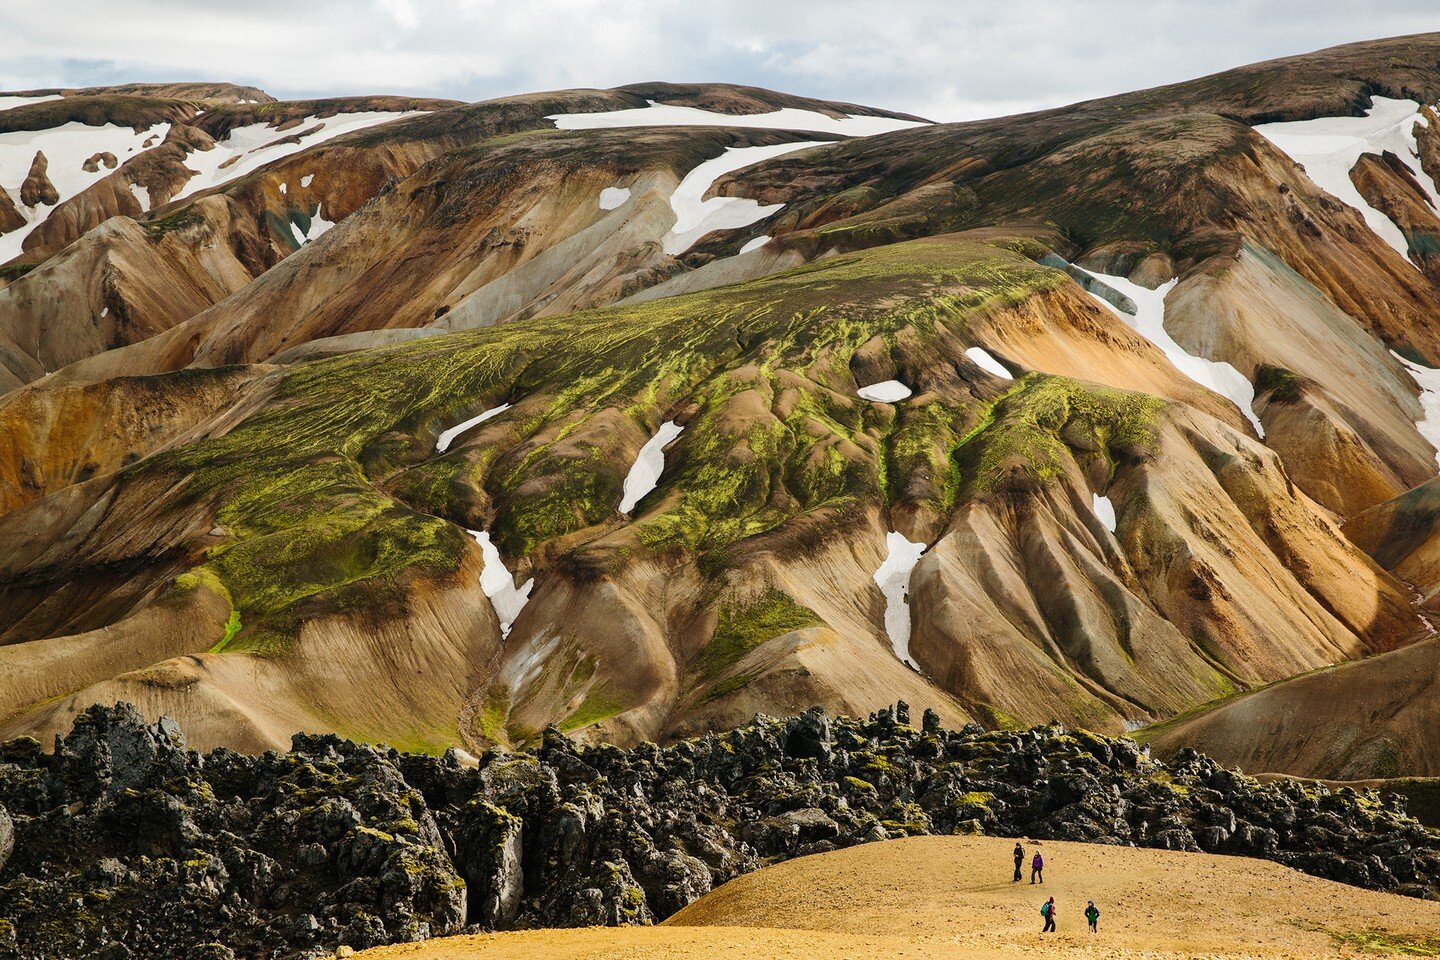 I have finally made my perfect week in Iceland guide! I first visited Iceland in 2016 and then returned last year and am ready to go back again. It's a magical place full of hot springs, waterfalls, rainbows, horses, glaciers, and painted hills. Many